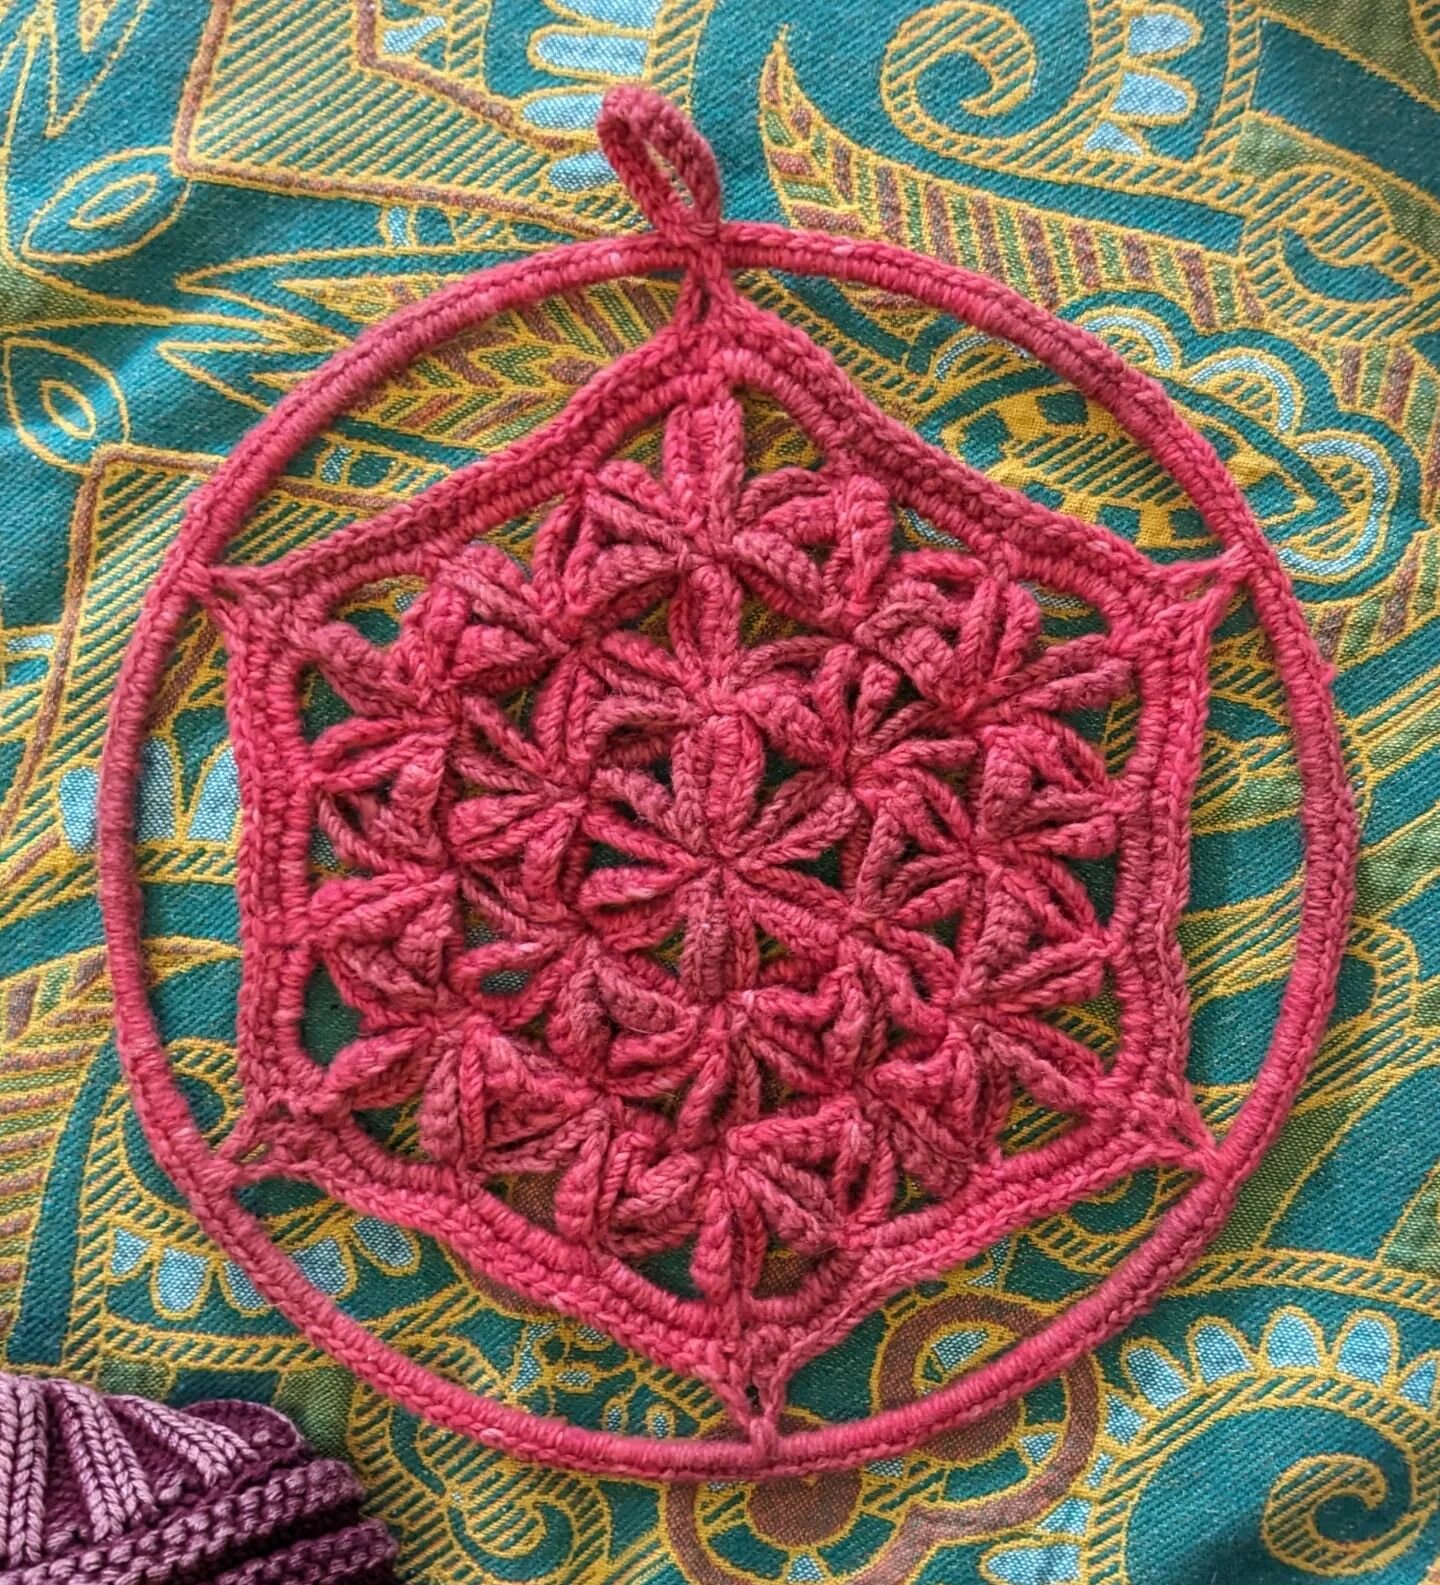 We're on our way to the #oregonflockandfiberfestival tomorrow! I'll soon post more details about where to find us. So excited!! ❤️🧶🐑
This sweet hanging will be there. Crocheted, madder dyed wool 💕 #madderdye #handcrafted #floweroflife #crochetever